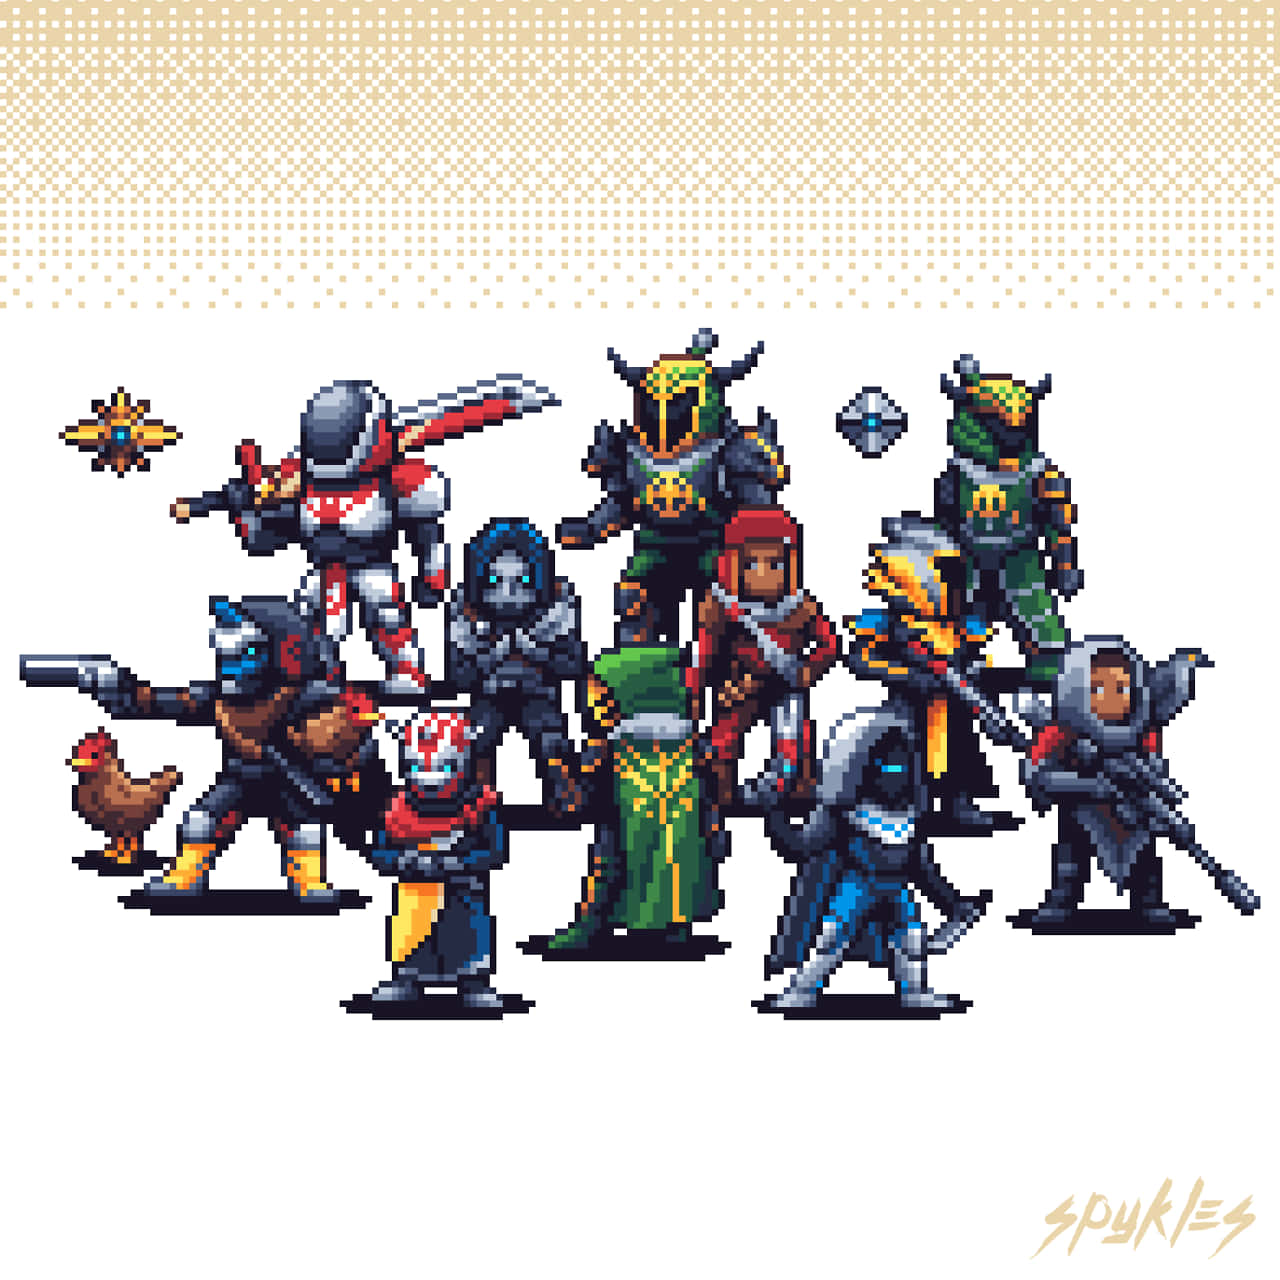 “Colorful Pixel Art of 'Destiny' Video Game Character” Wallpaper